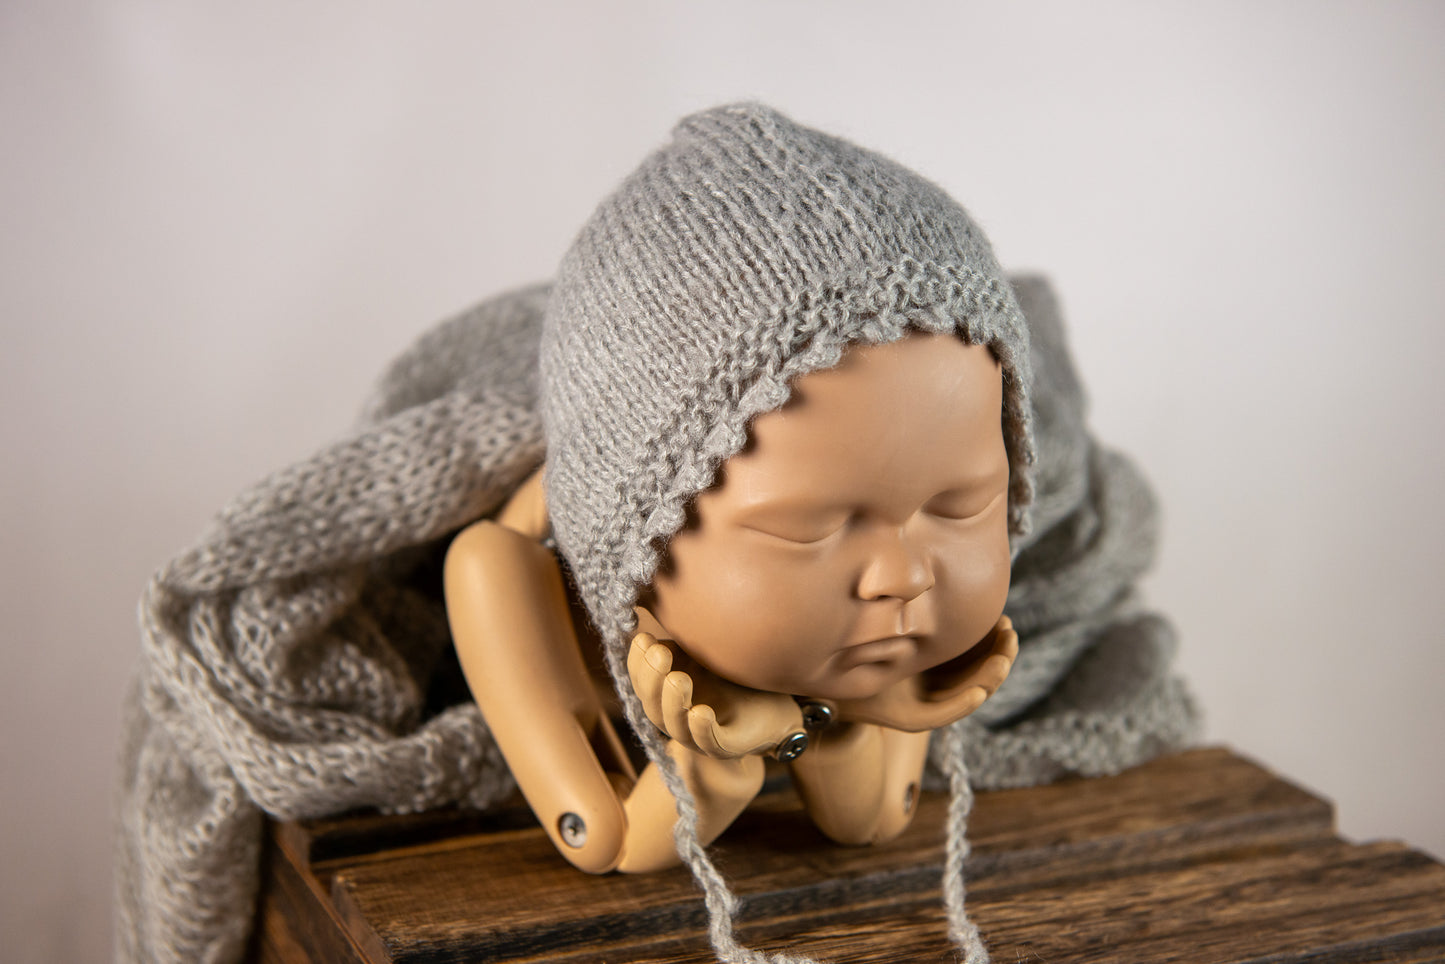 Sleeping doll in gray knit bonnet with matching wrap as cozy newborn photography prop.